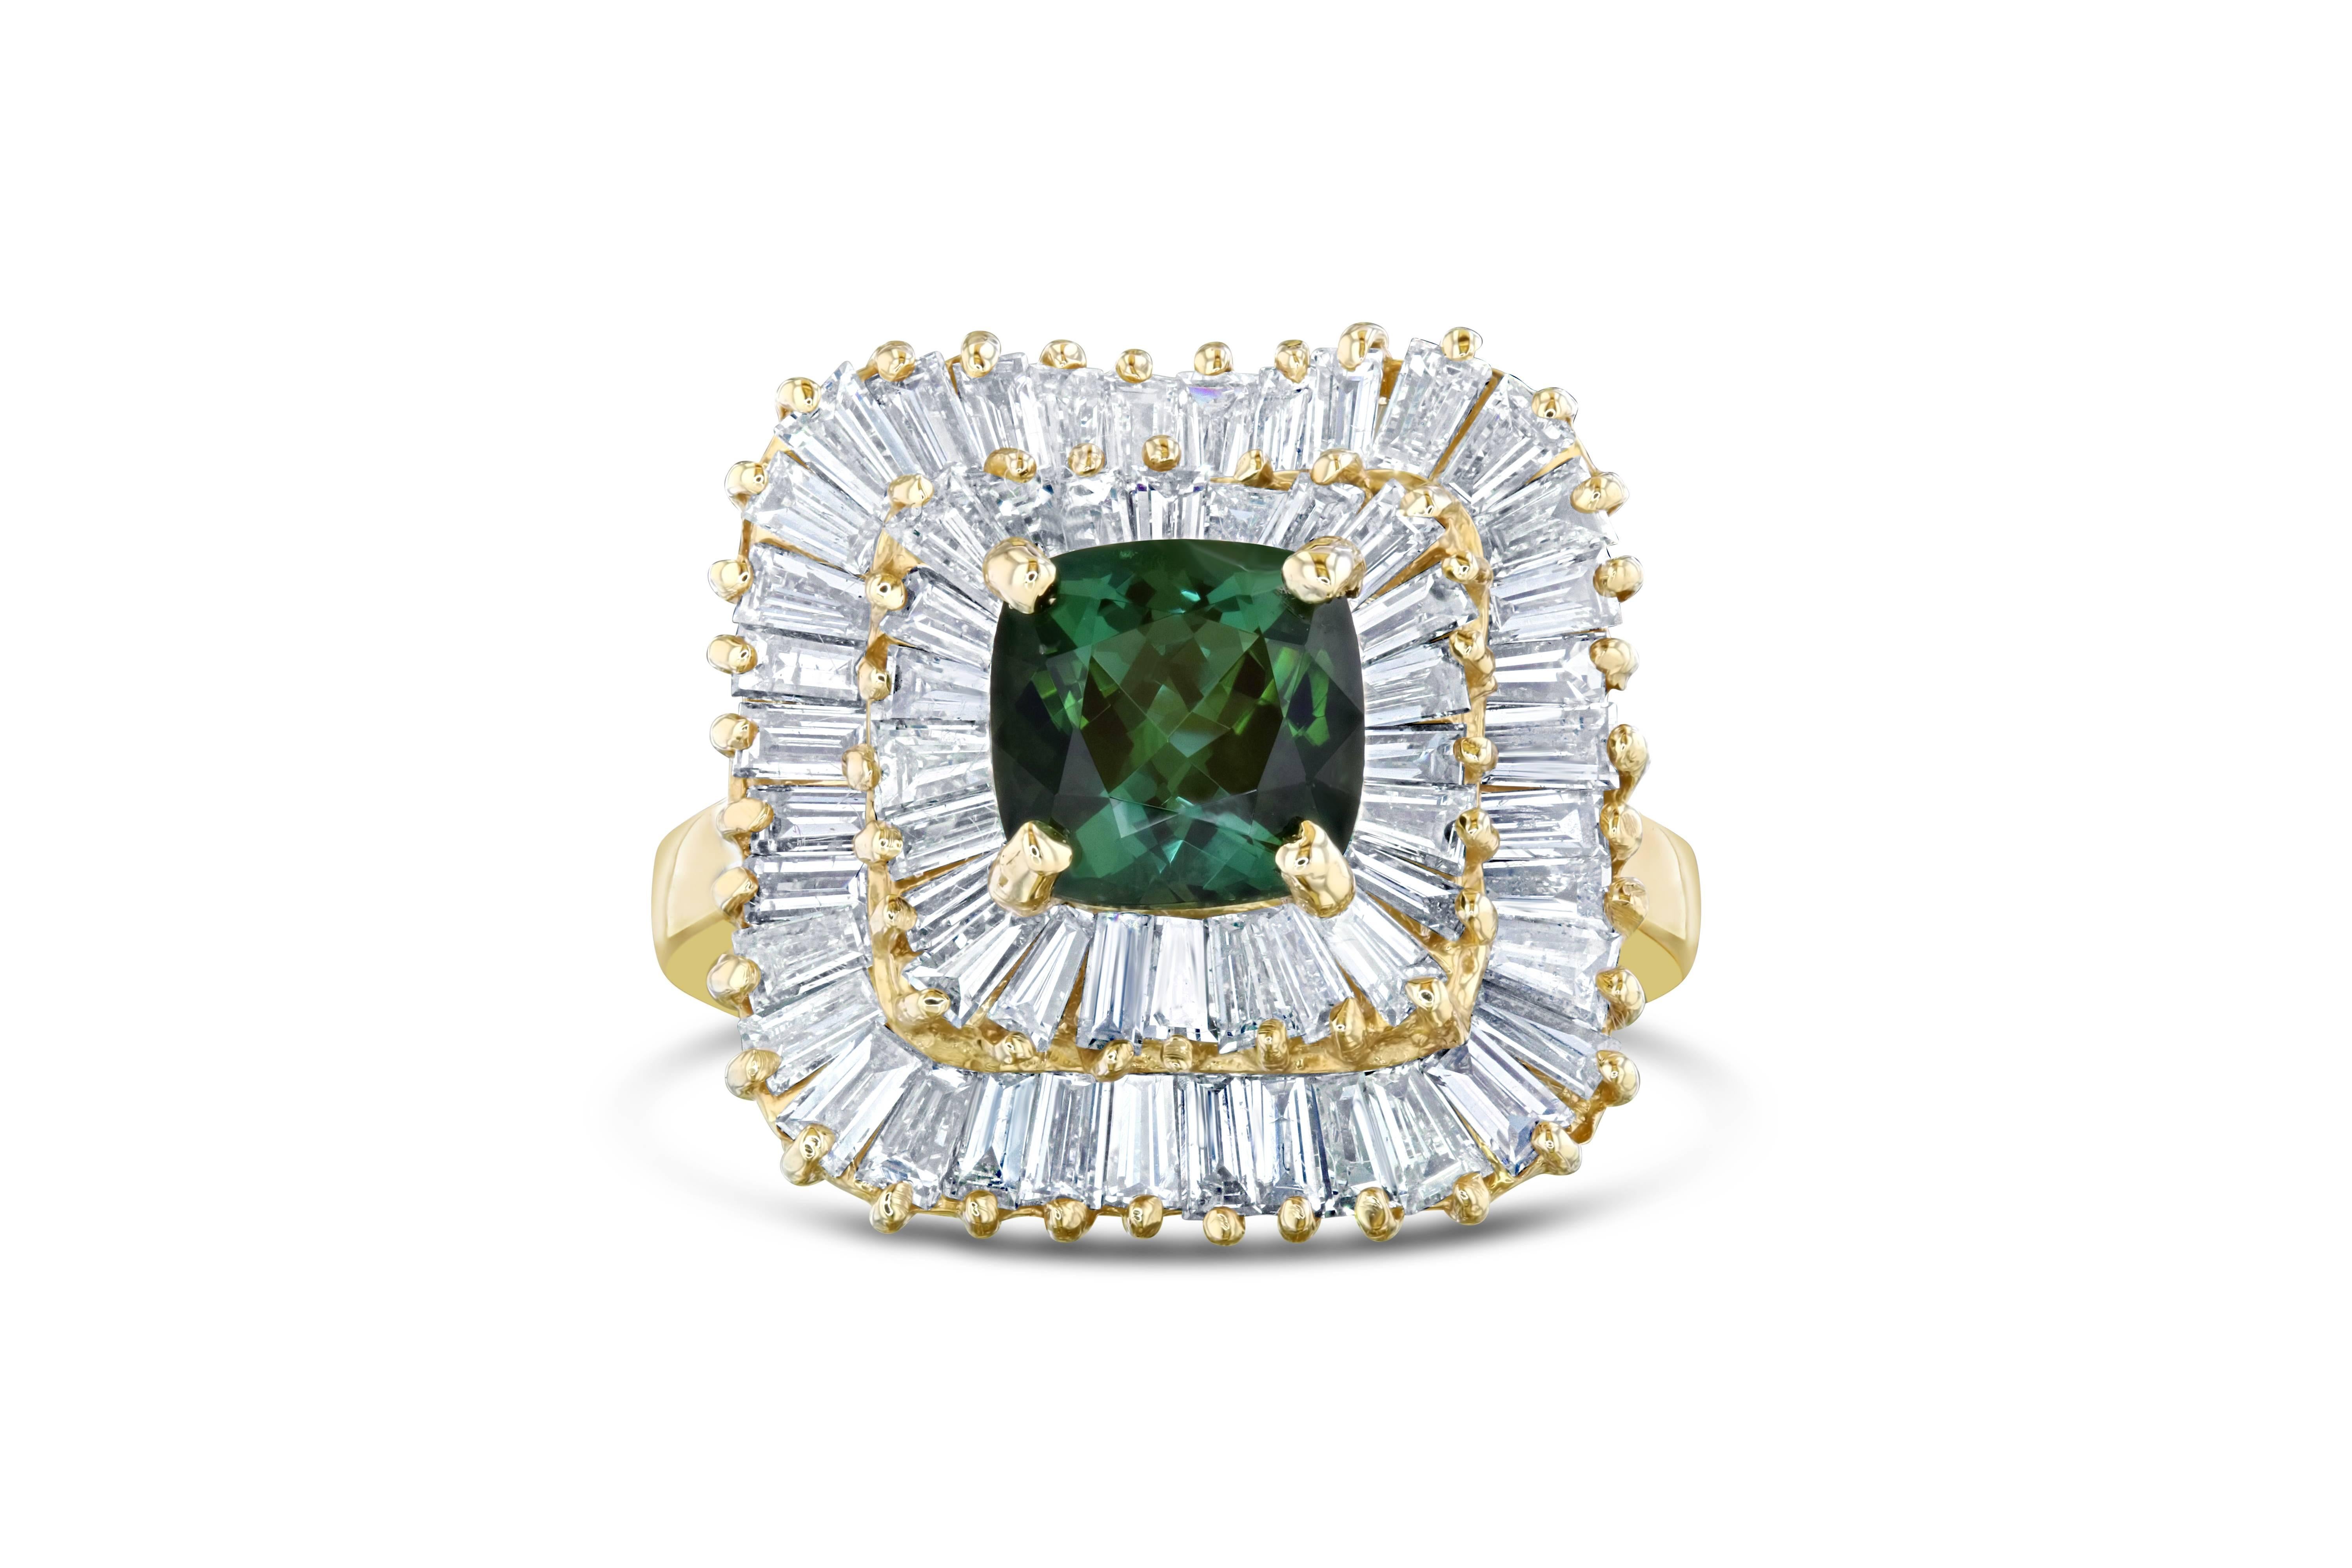 This beautiful ballerina style ring has a Asscher cut Green Tourmaline weighing 1.48 Carats and 60 Baguette Cut Diamonds floating around the tourmaline, weighing 2.18 Carats. The total carat weight of the ring is 3.66 Carats. It is set in 14K Yellow